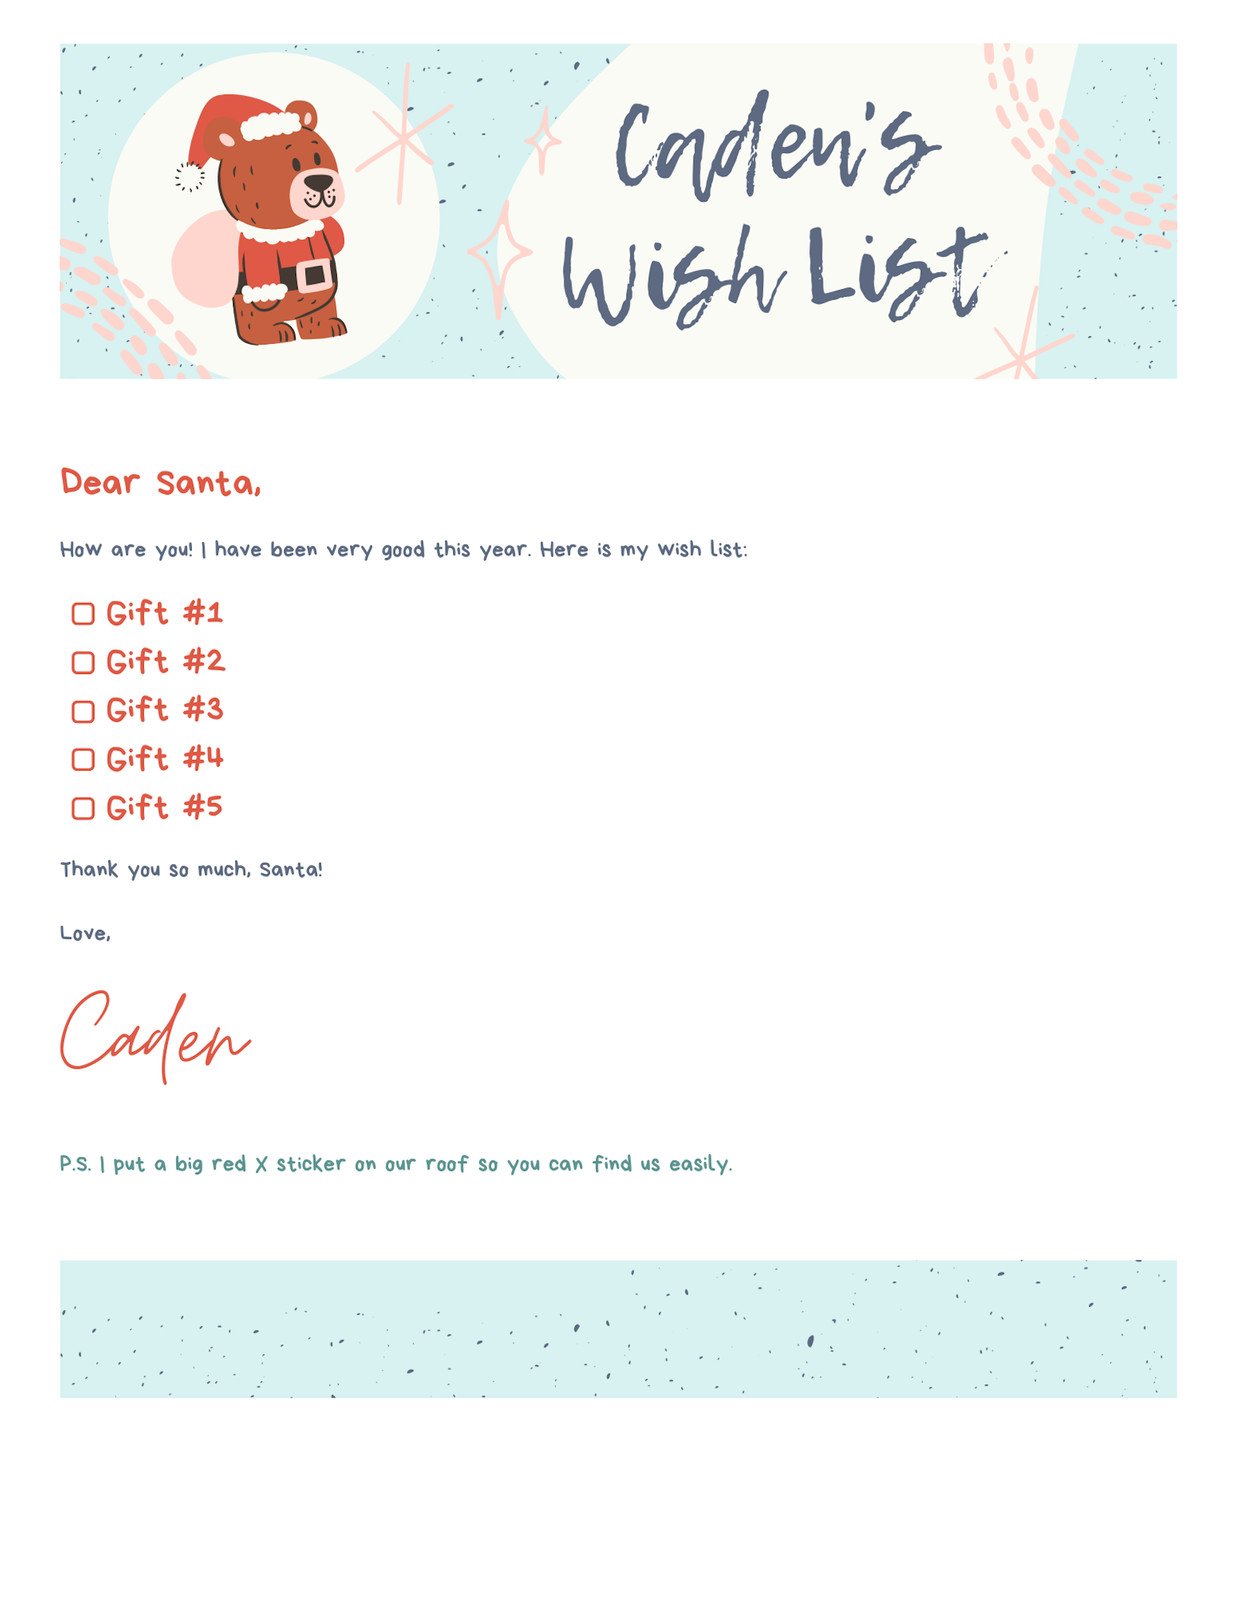 Christmas Letter Doc in Pastel Blue Pastel Pink Bright Red Playful Illustrative Style